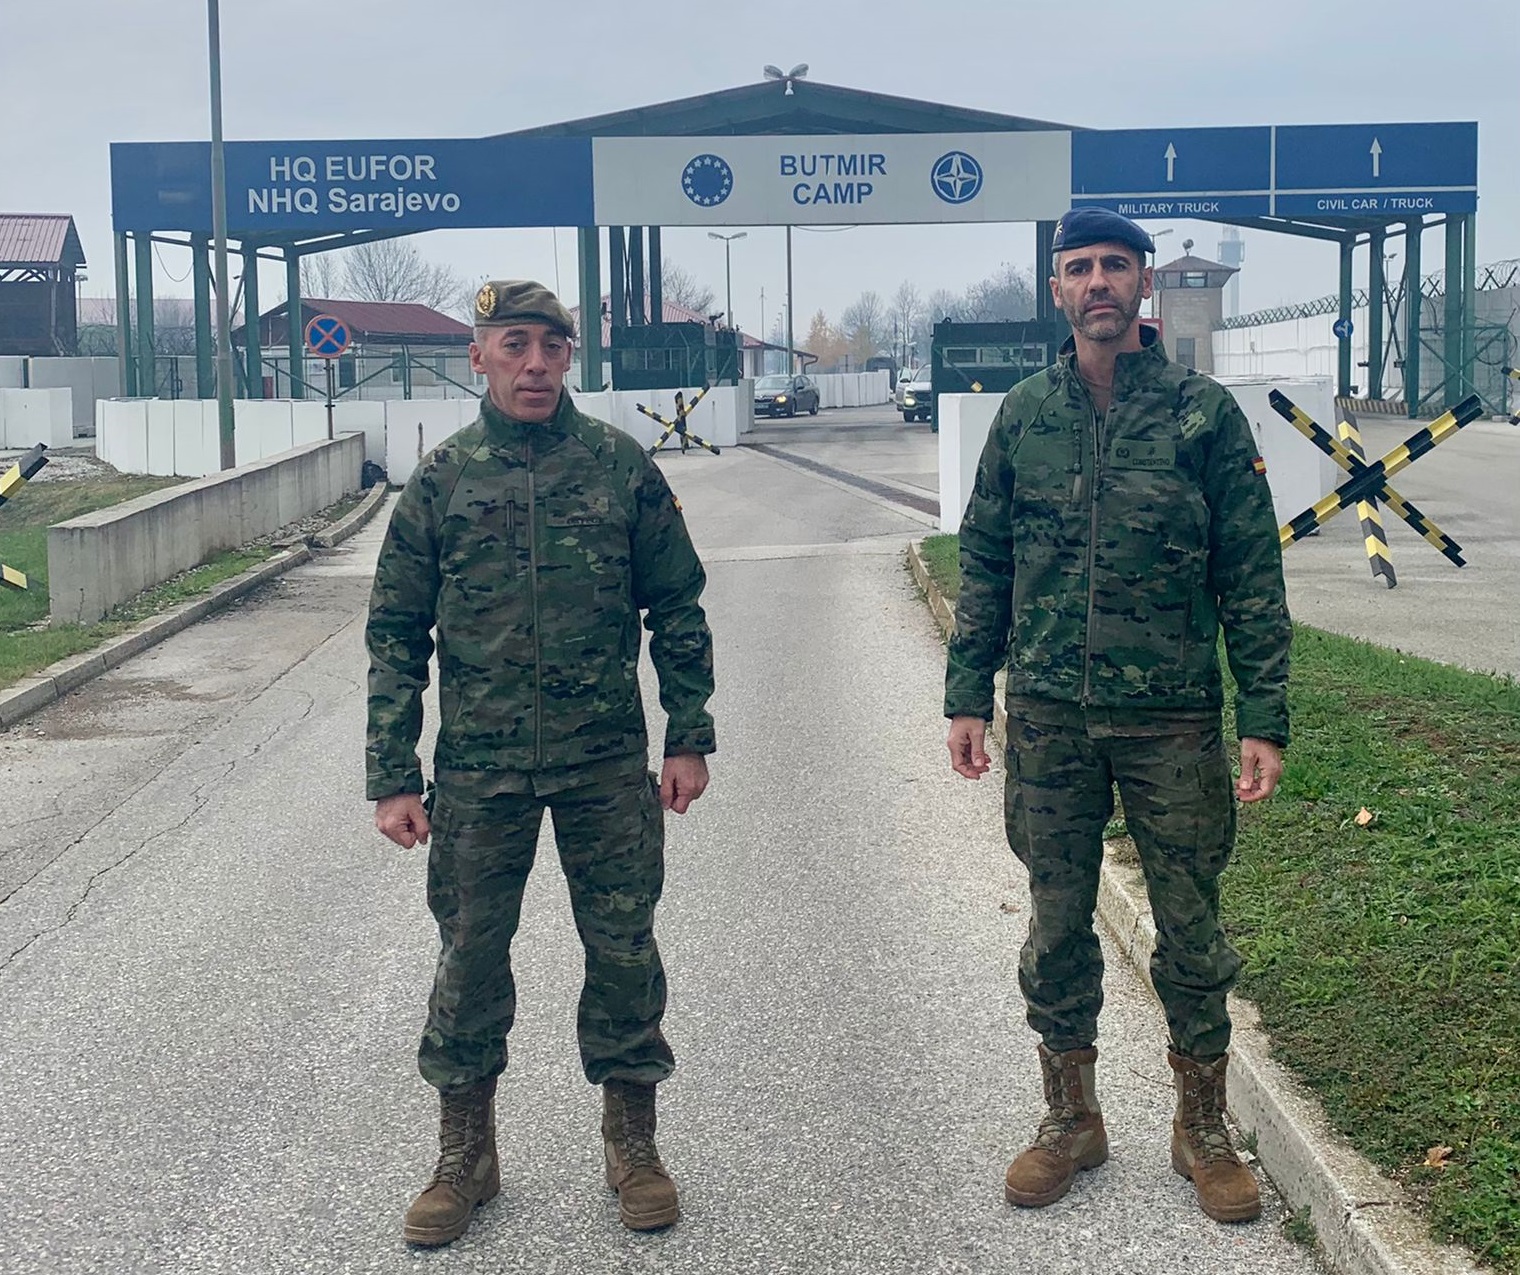 Spanish military personnel embedded in the EUFOR Headquarters